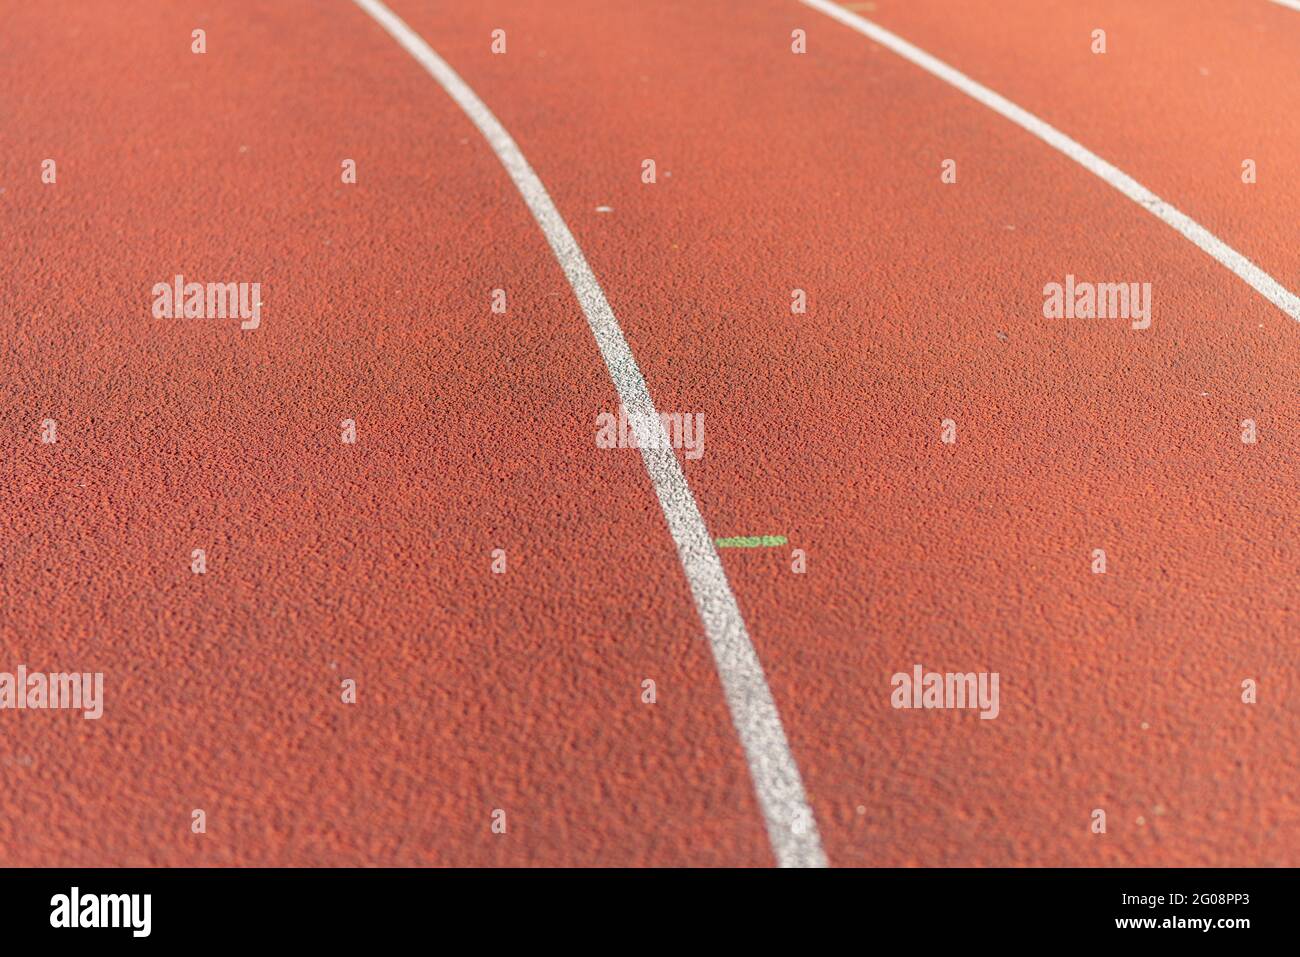 Part Red plastic track in the outdoor track and field stadium.Closeup. Stock Photo